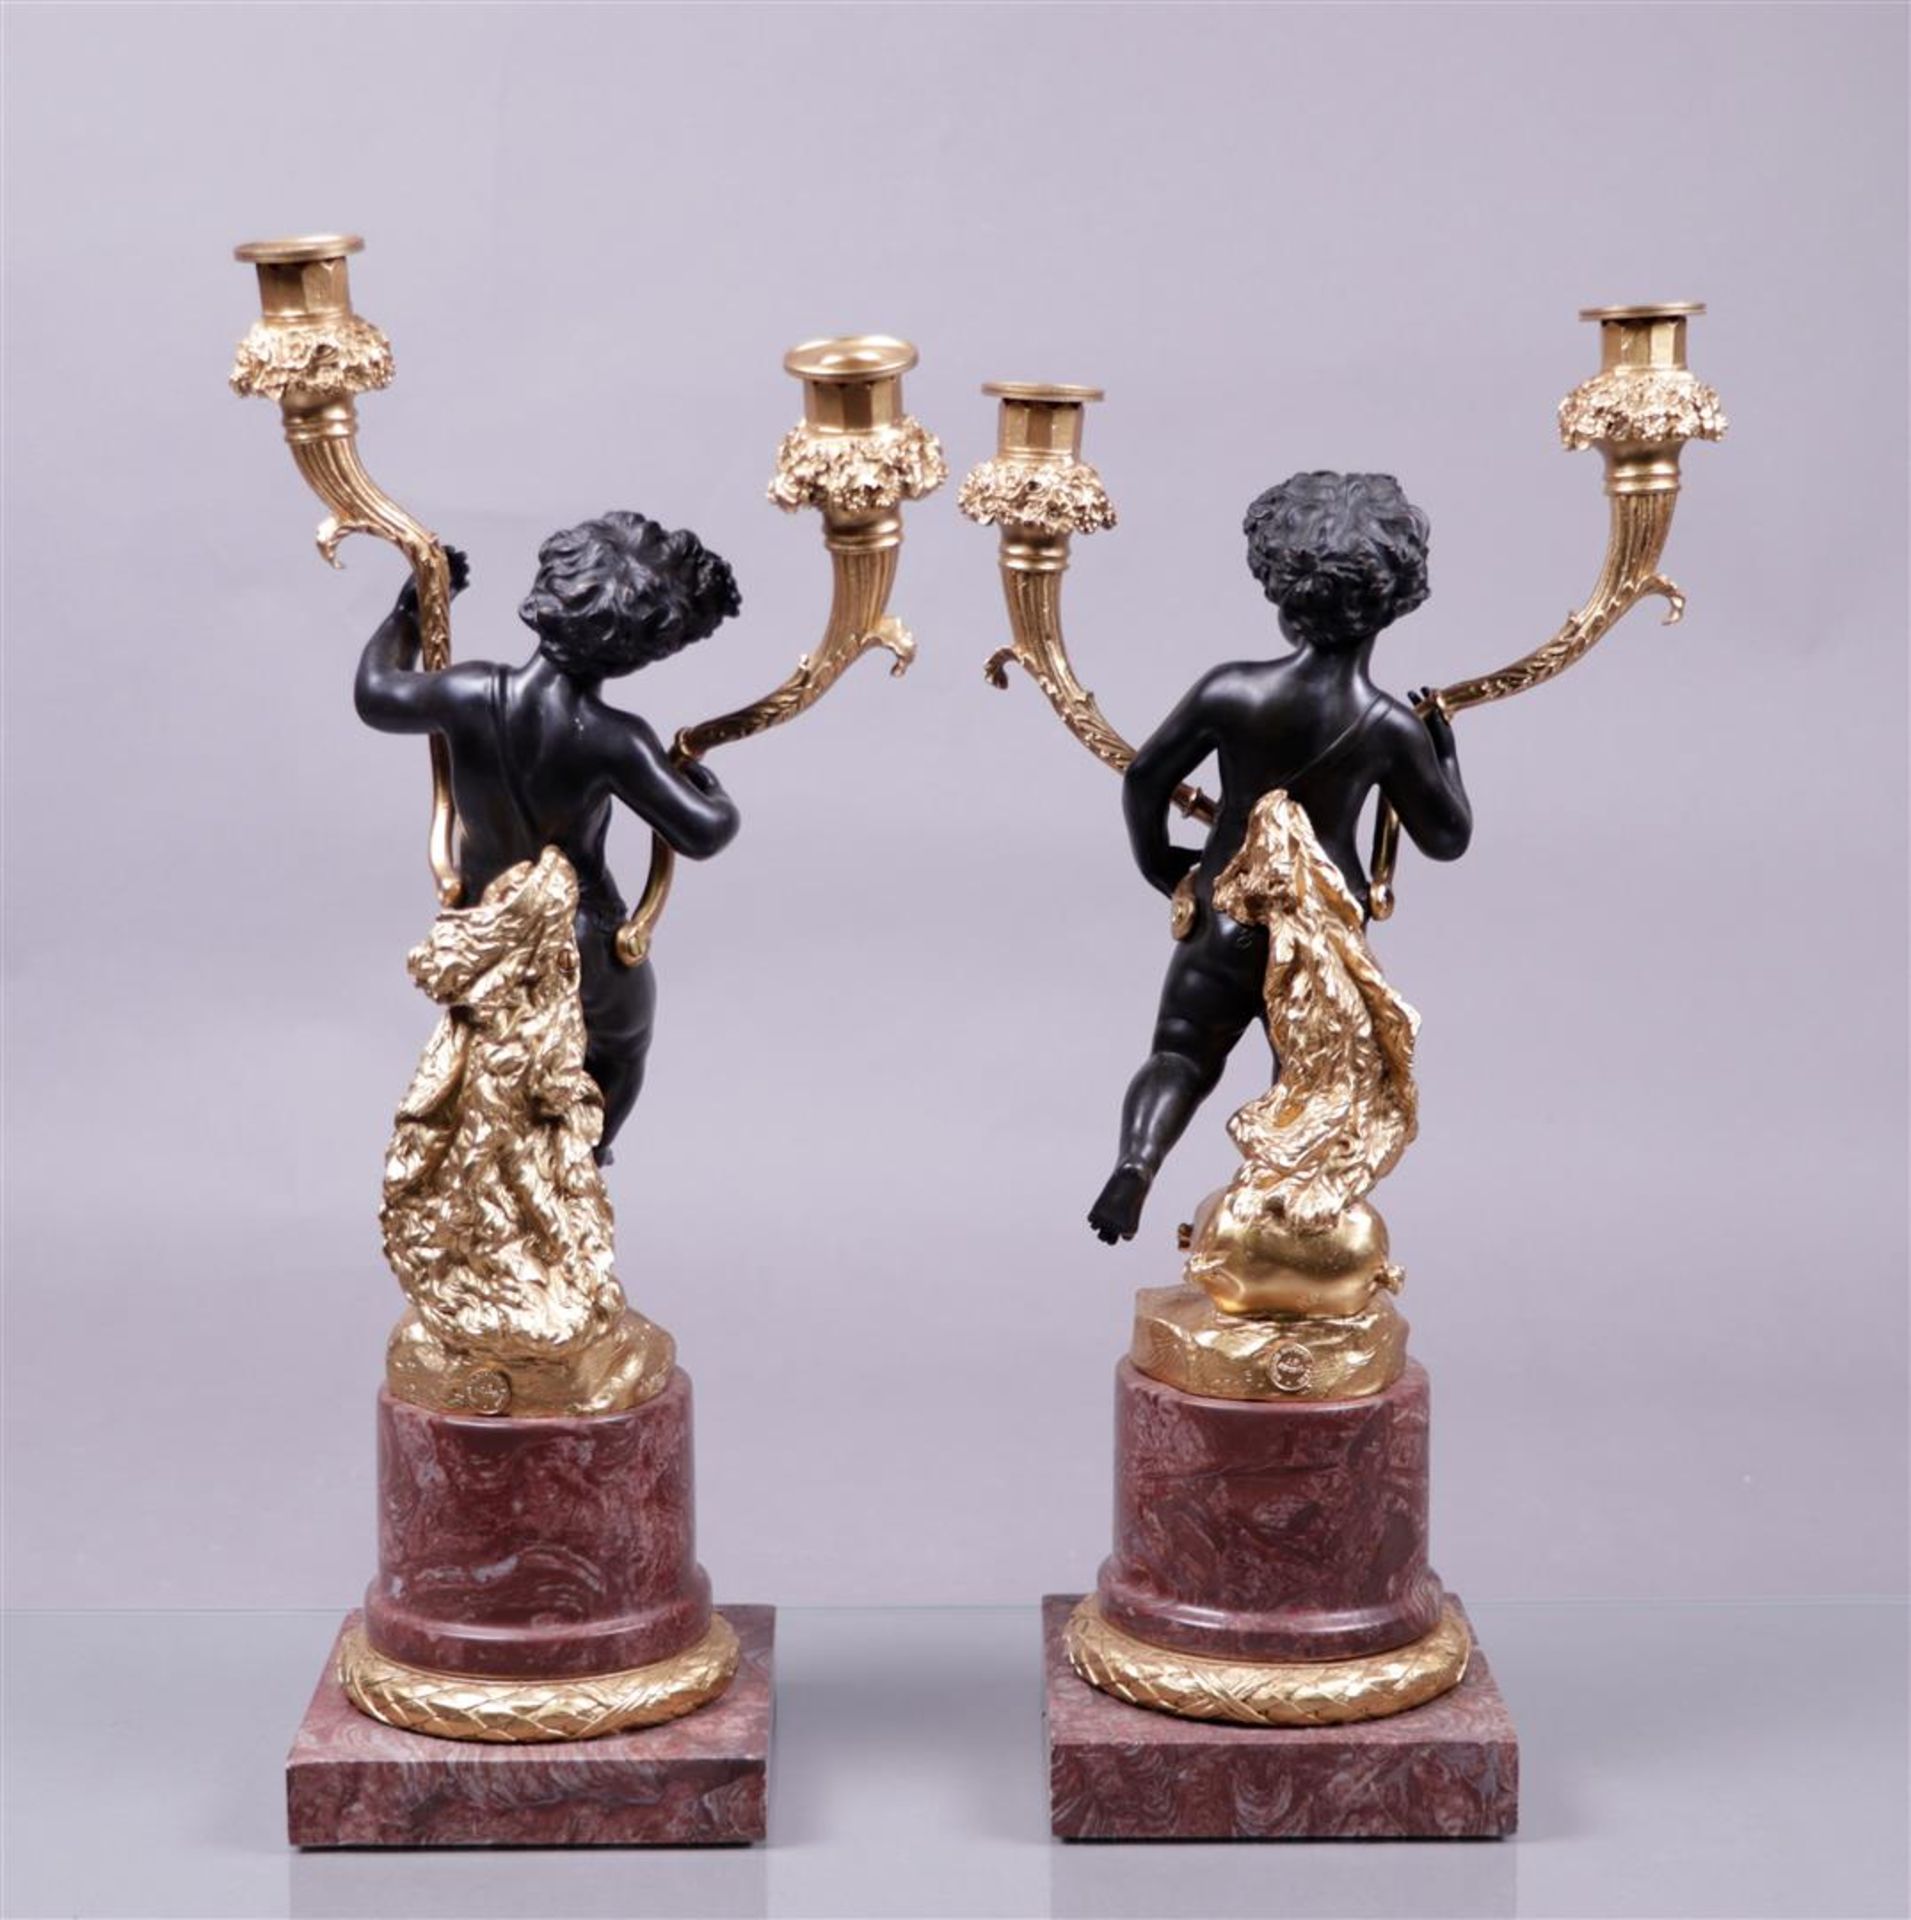 A set of second Empire style candlesticks on pink marble bases.
H.: 53 cm. - Image 3 of 3